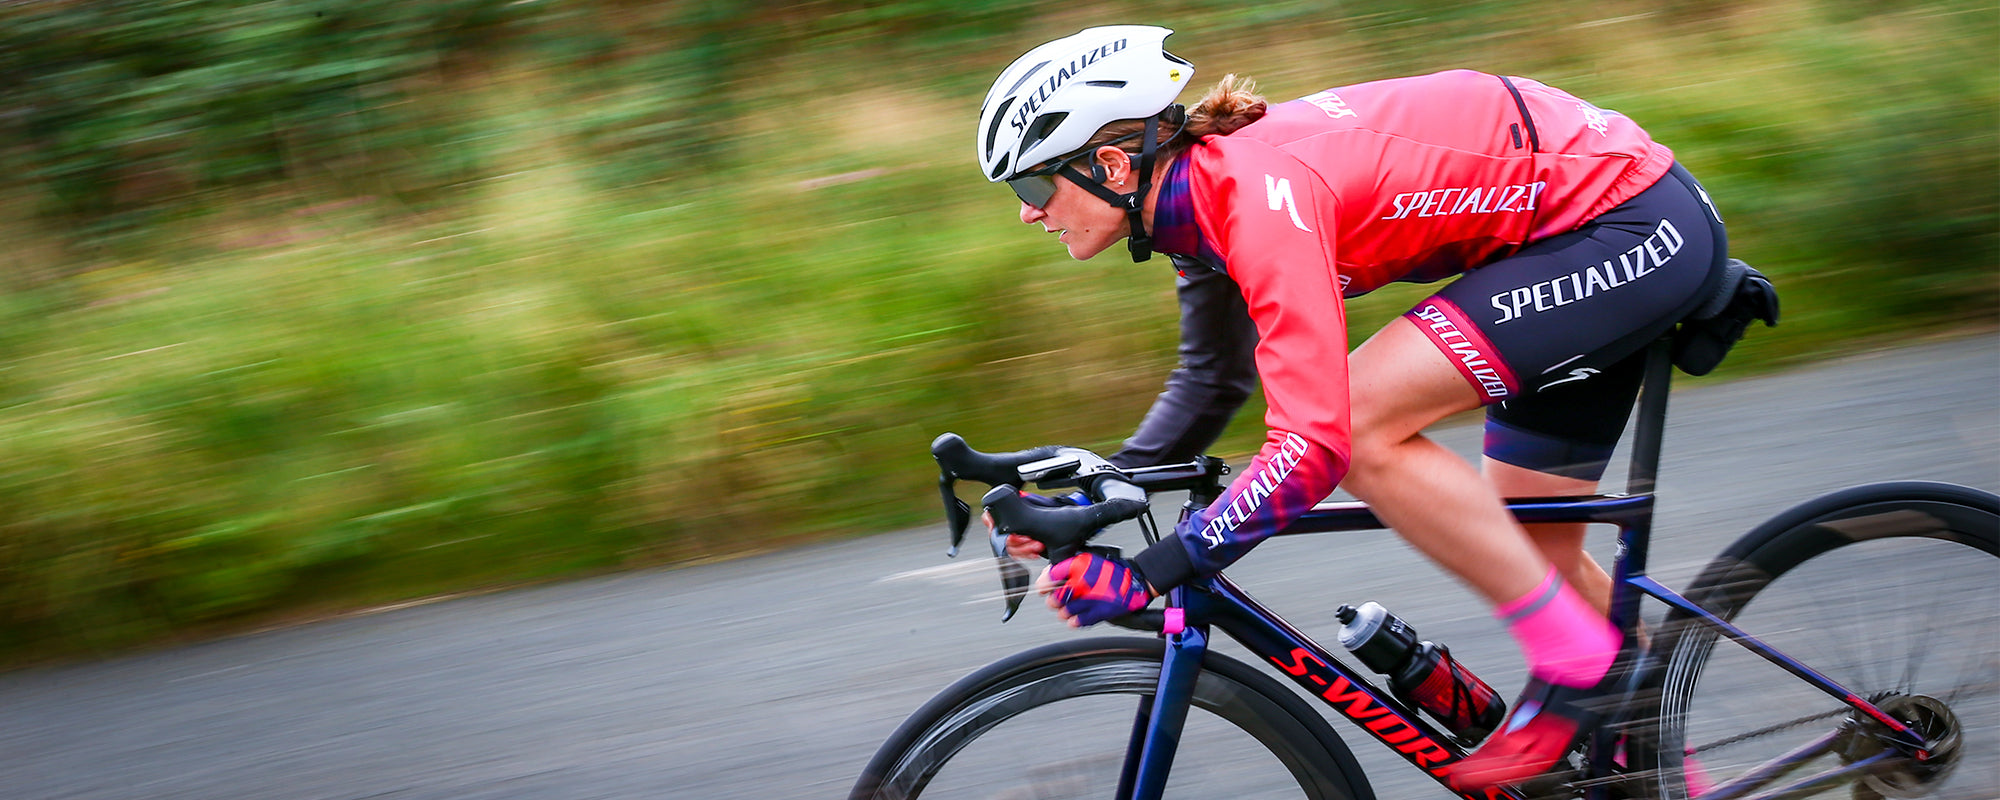 Professional Triathlete Katie Z. Shares Her Top Cycling Tips for Beginners